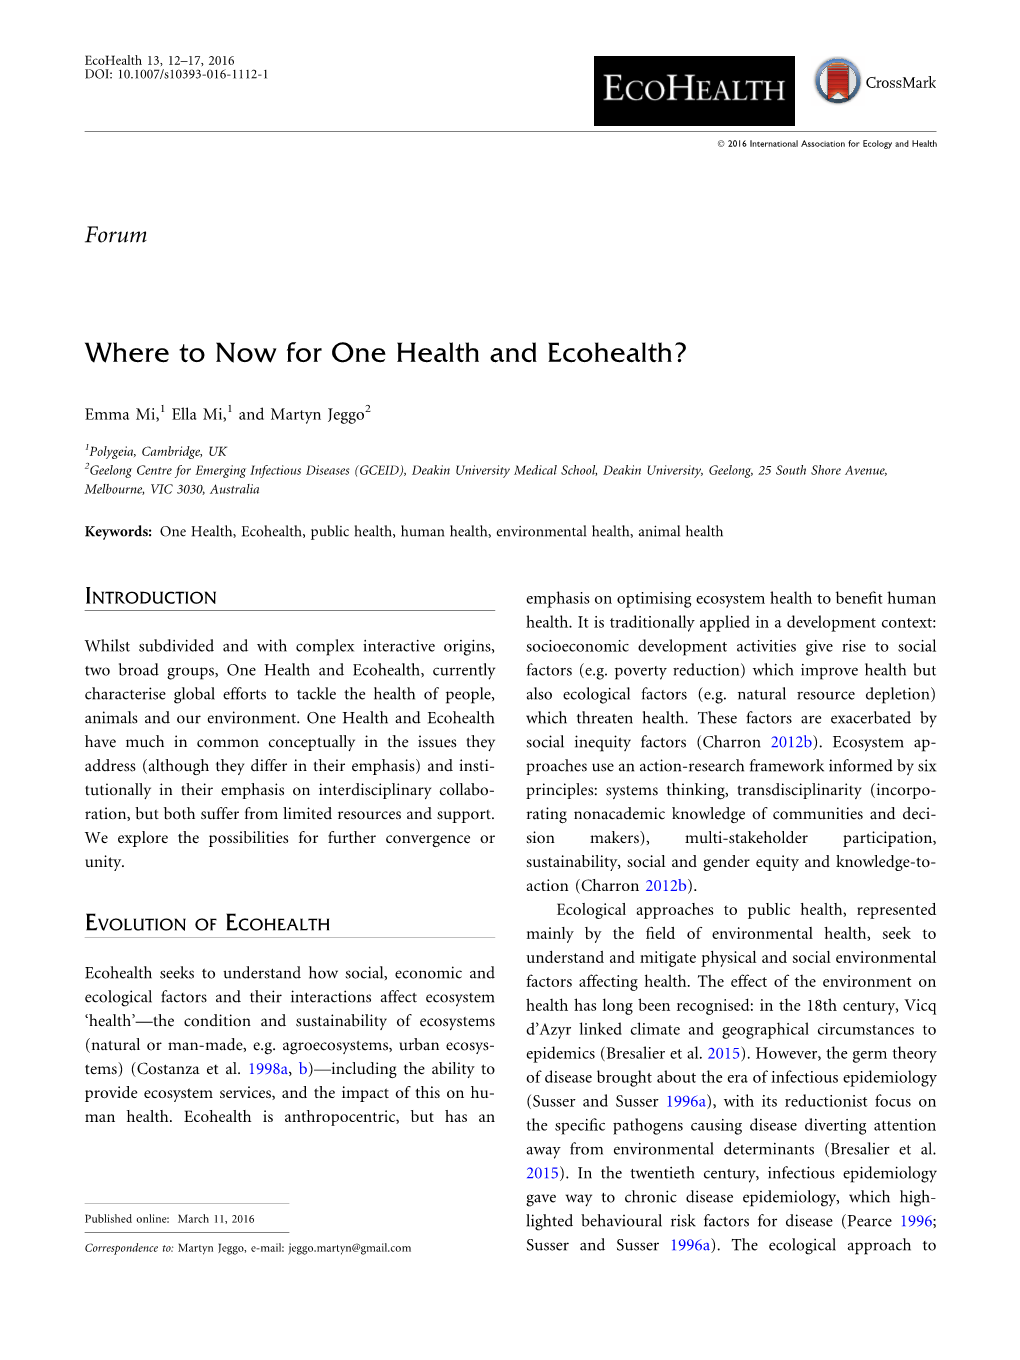 Where to Now for One Health and Ecohealth?